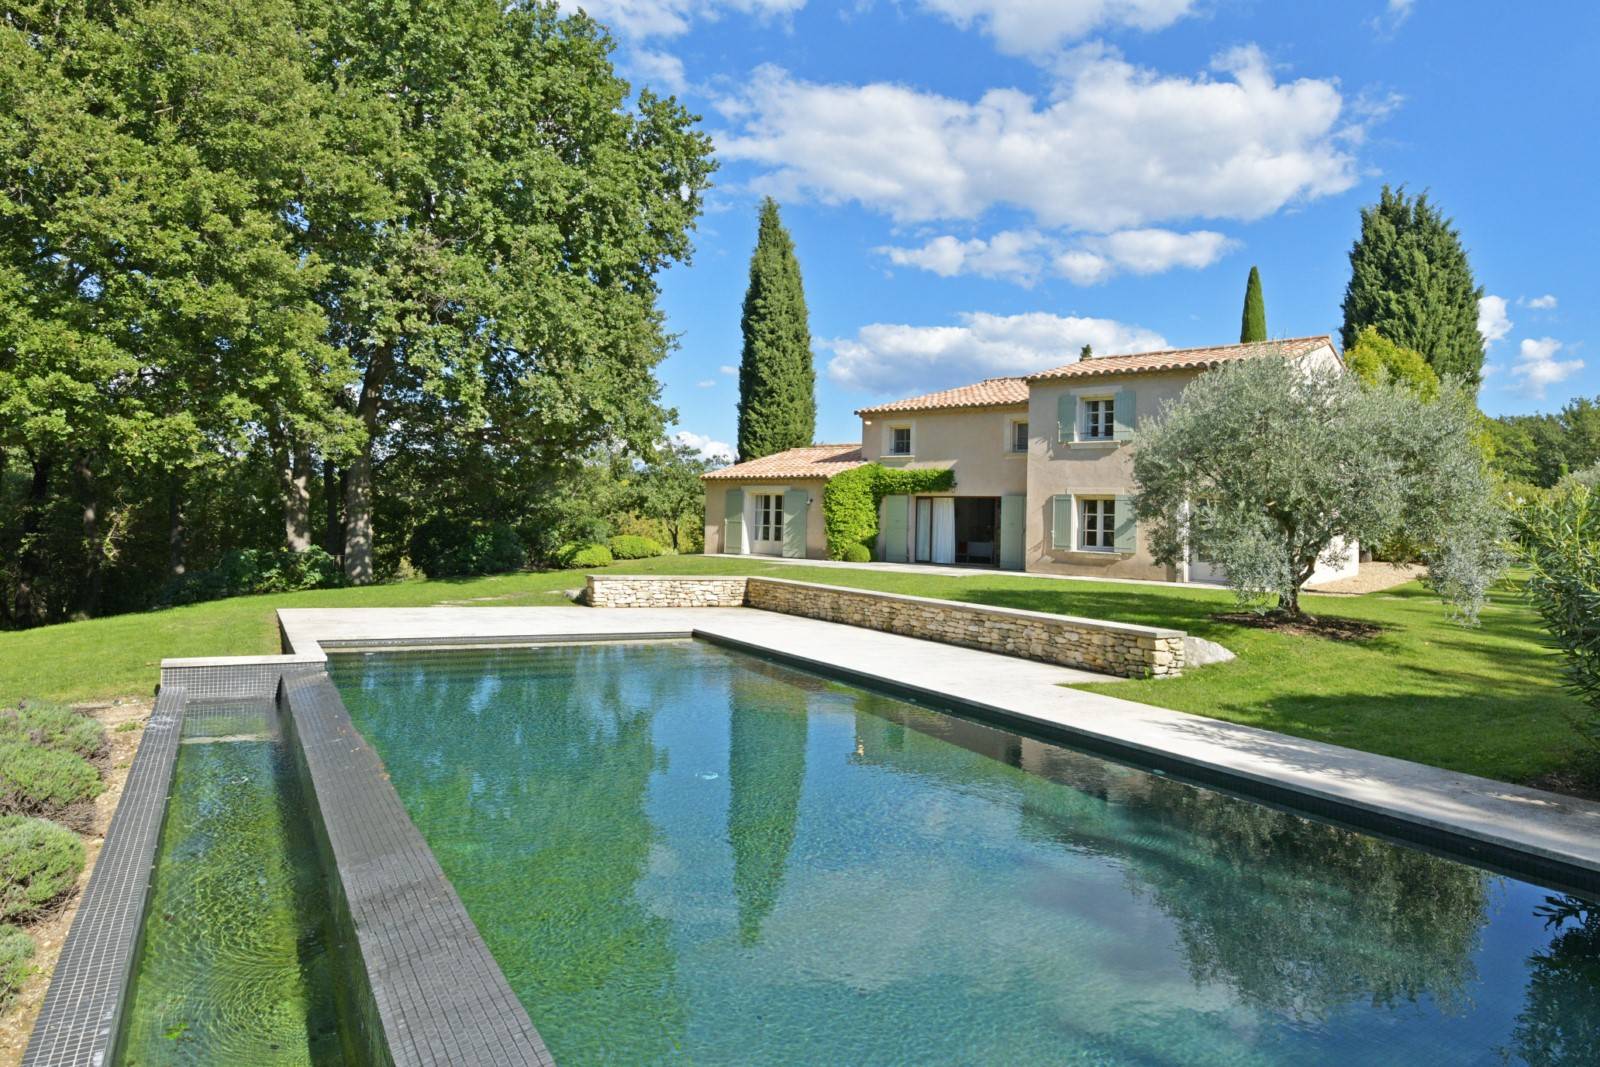 ROSIER Real Estate in Gordes is selling this elegant property with outbuildings and dominant view in Lacoste